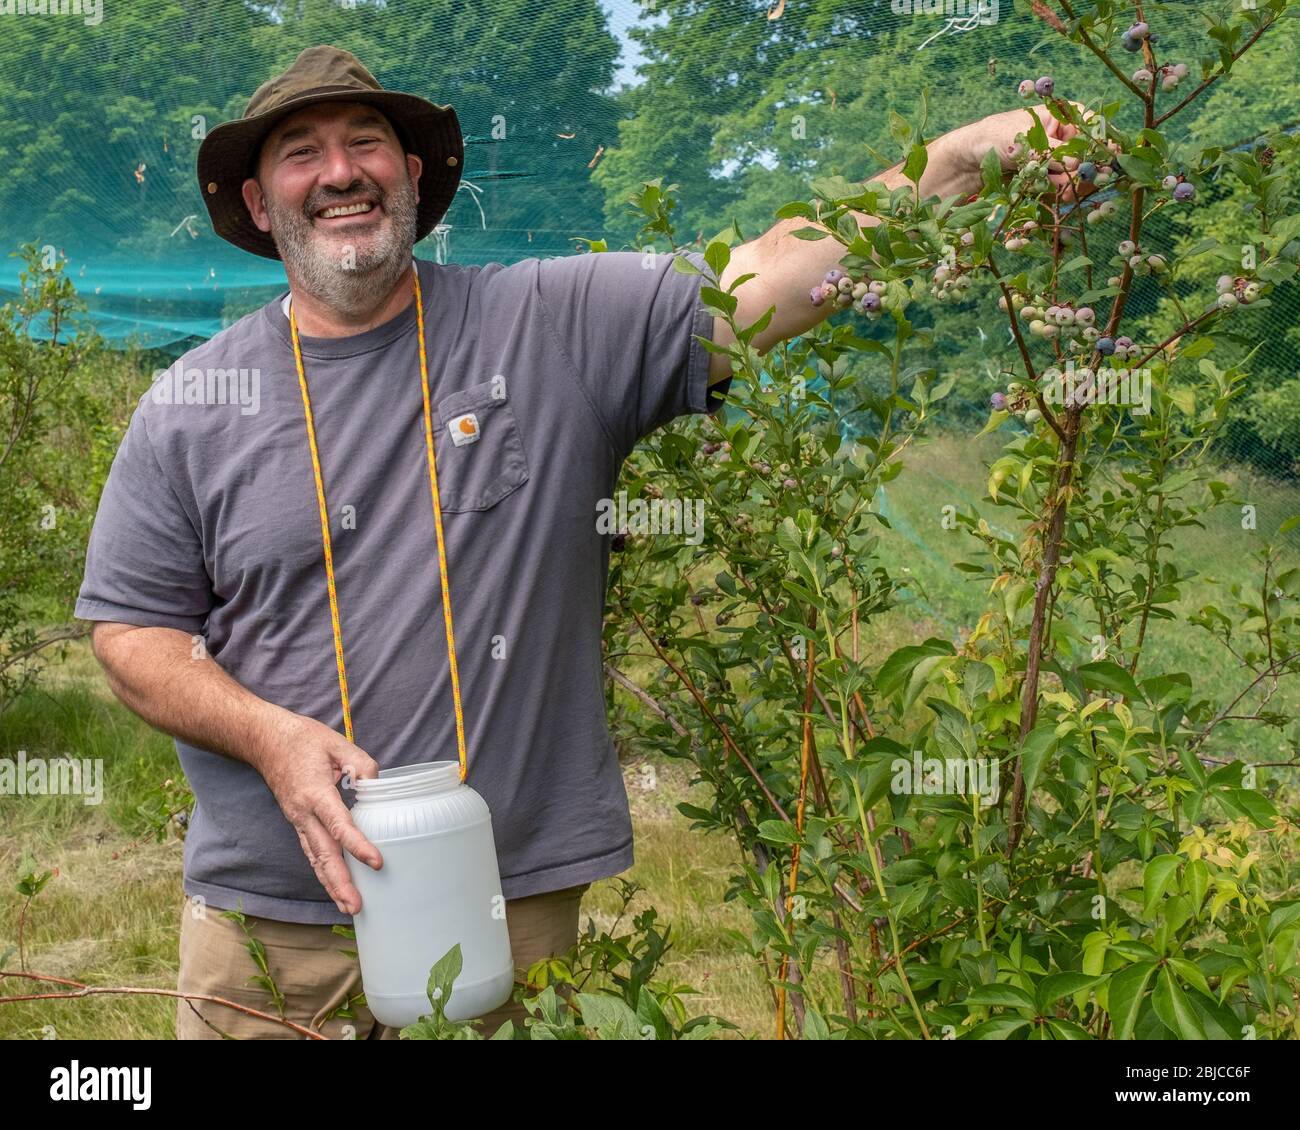 Man picking blueberries at a farm in Massachusetts Stock Photo